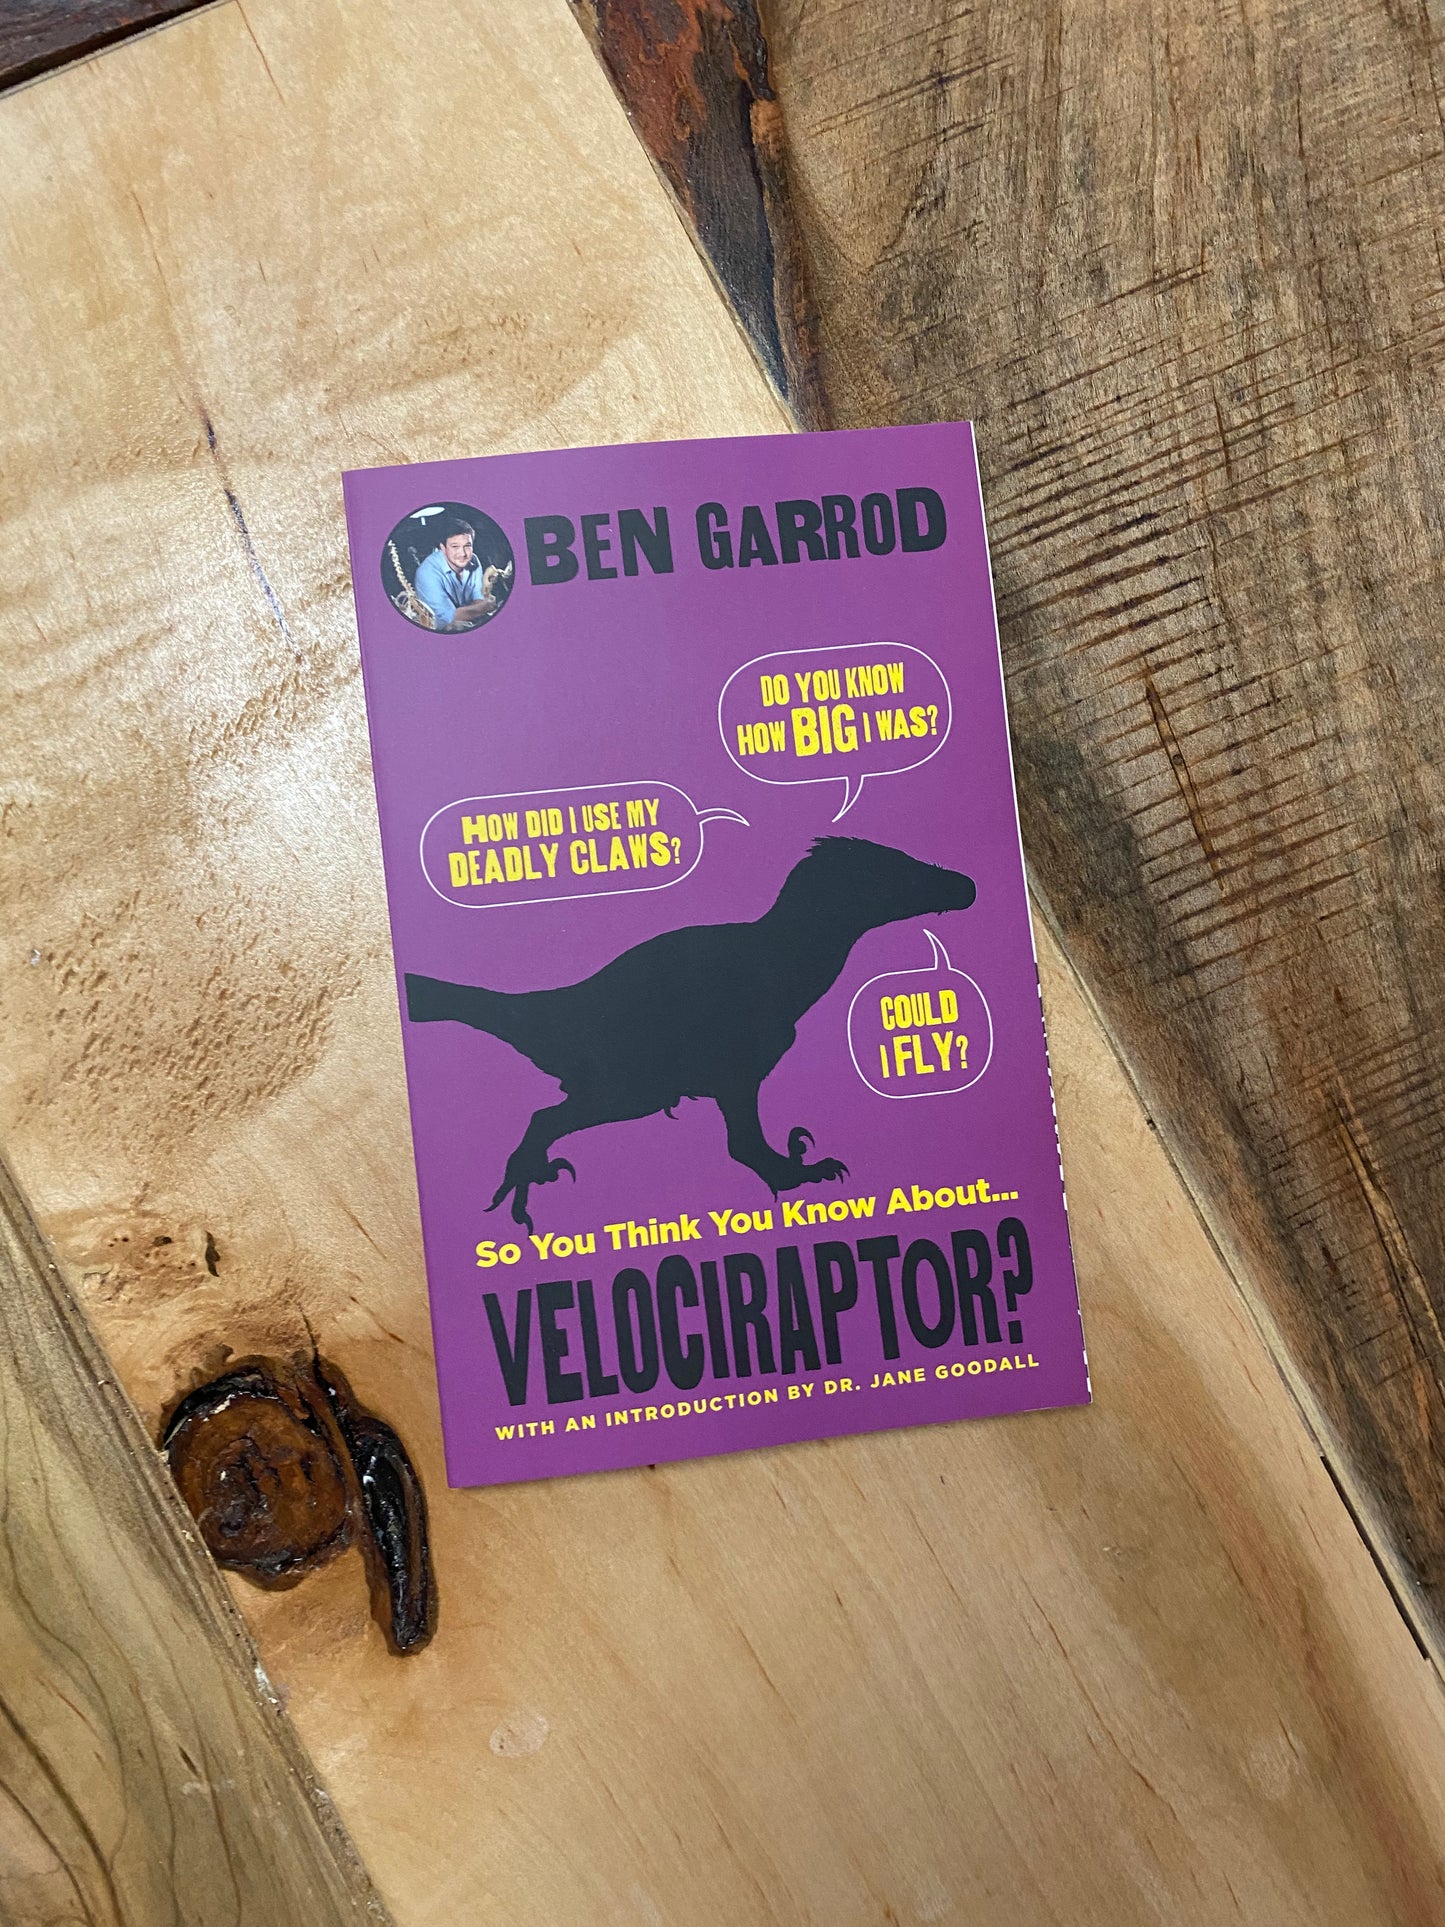 So you think you know about velociraptor